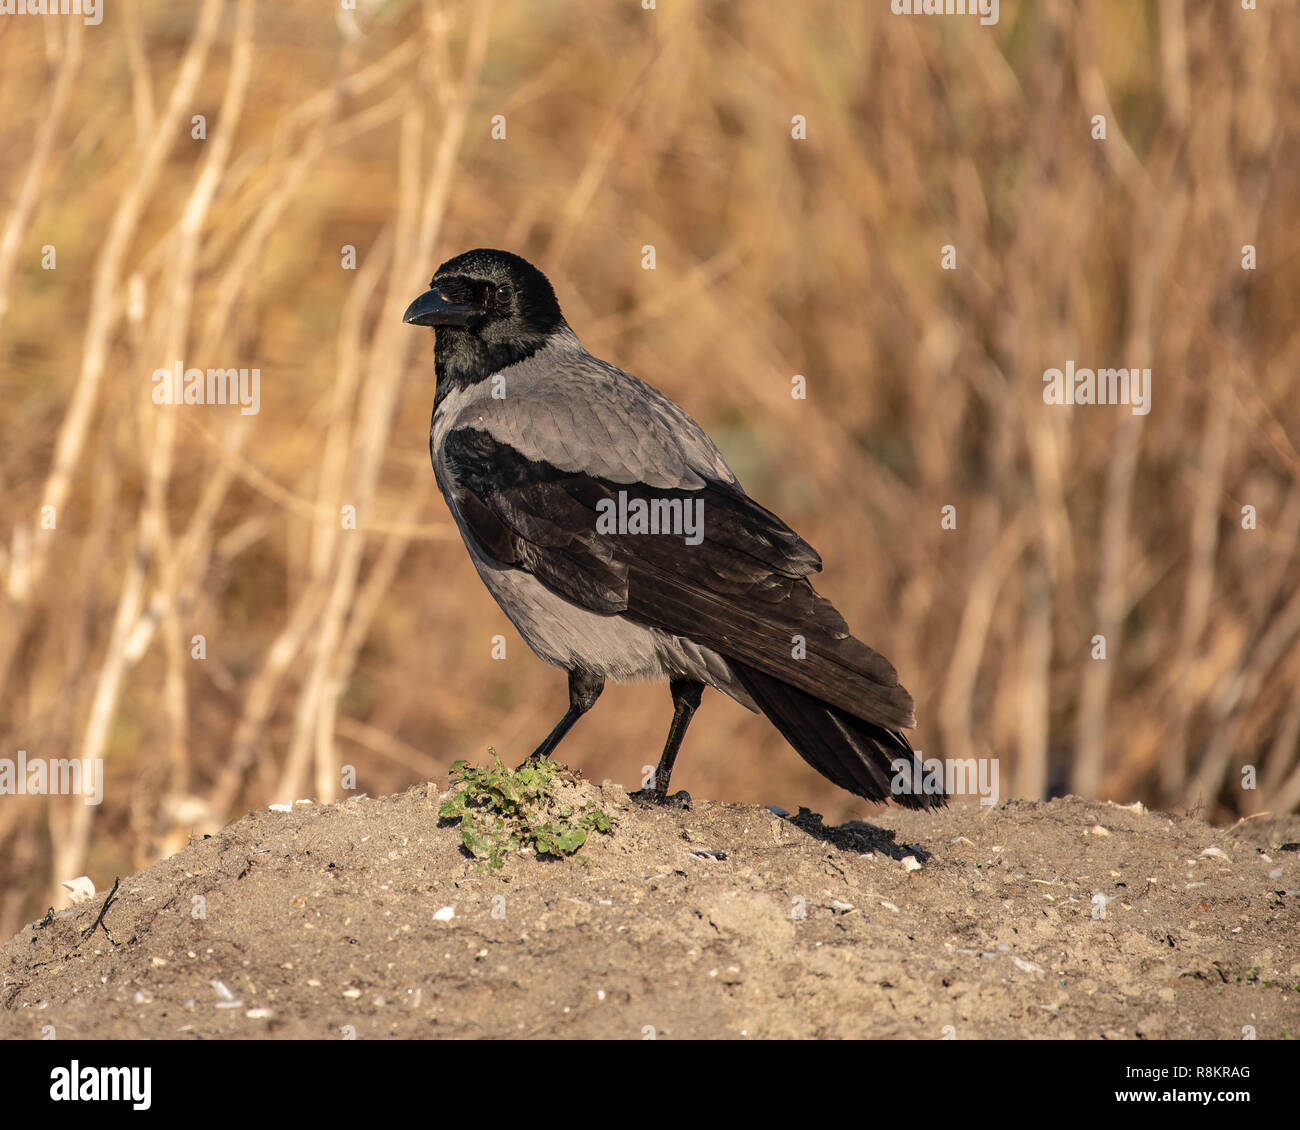 Hooded Crow Stands on Ground Stock Photo